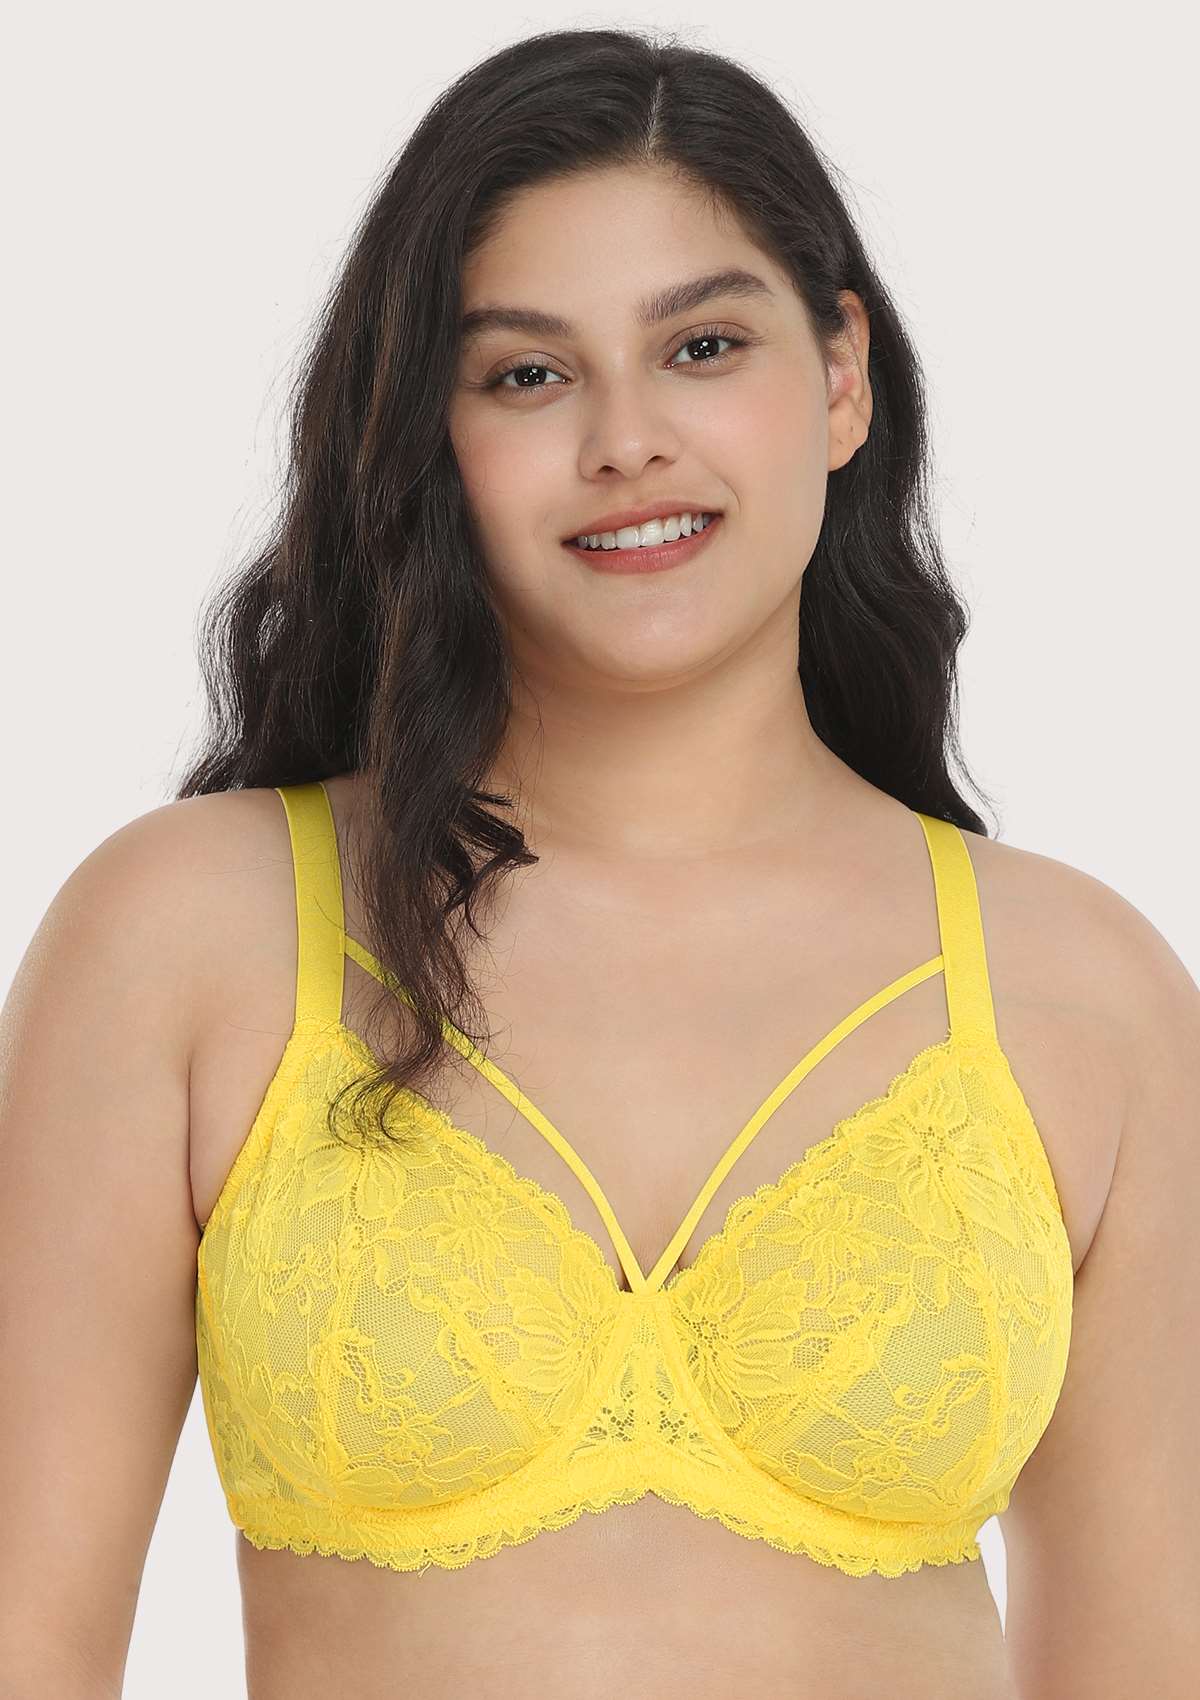 HSIA Unlined Lace Mesh Minimizer Bra For Large Breasts, Full Coverage - Bright Yellow / 44 / G